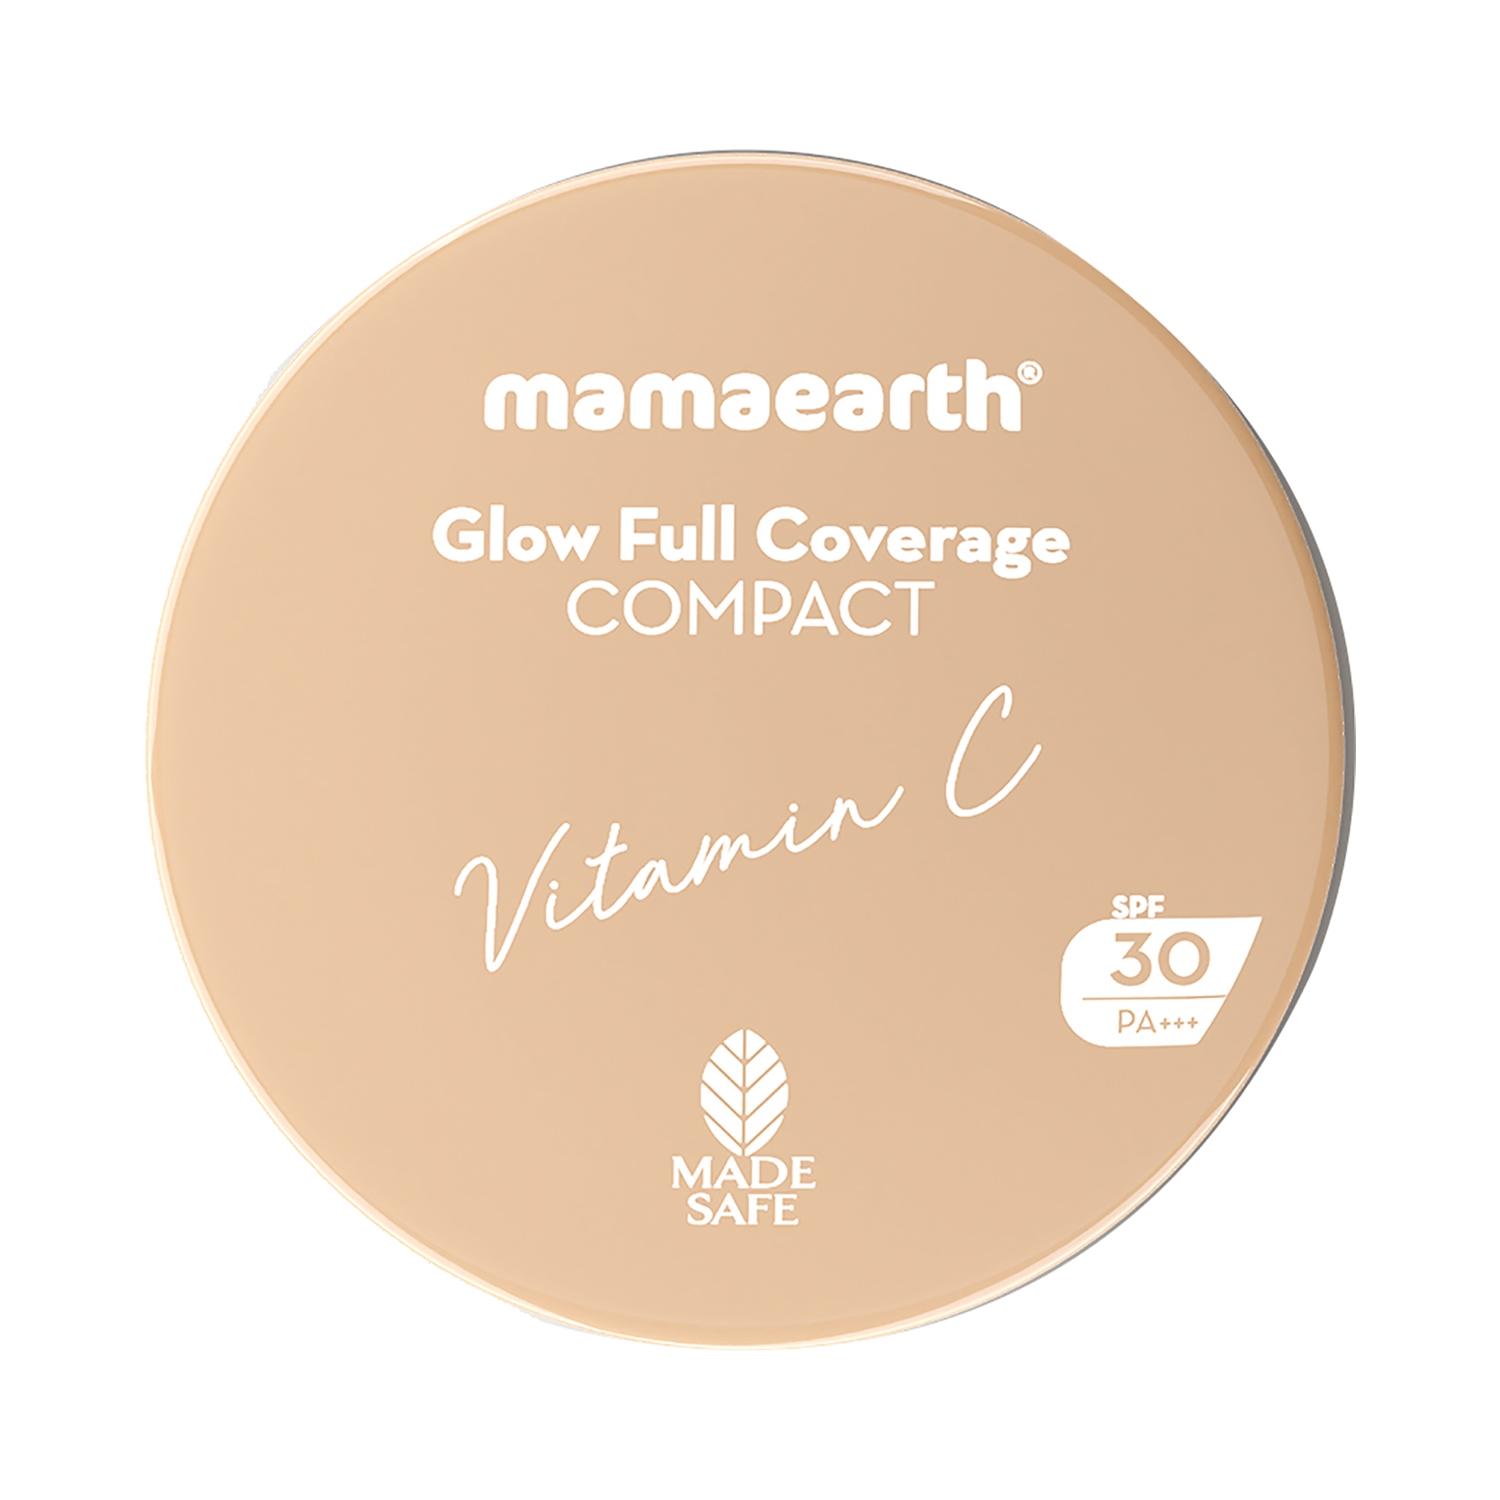 mamaearth glow full coverage compact spf 30 pa+++ with vitamin c - 05 almond glow (9g)